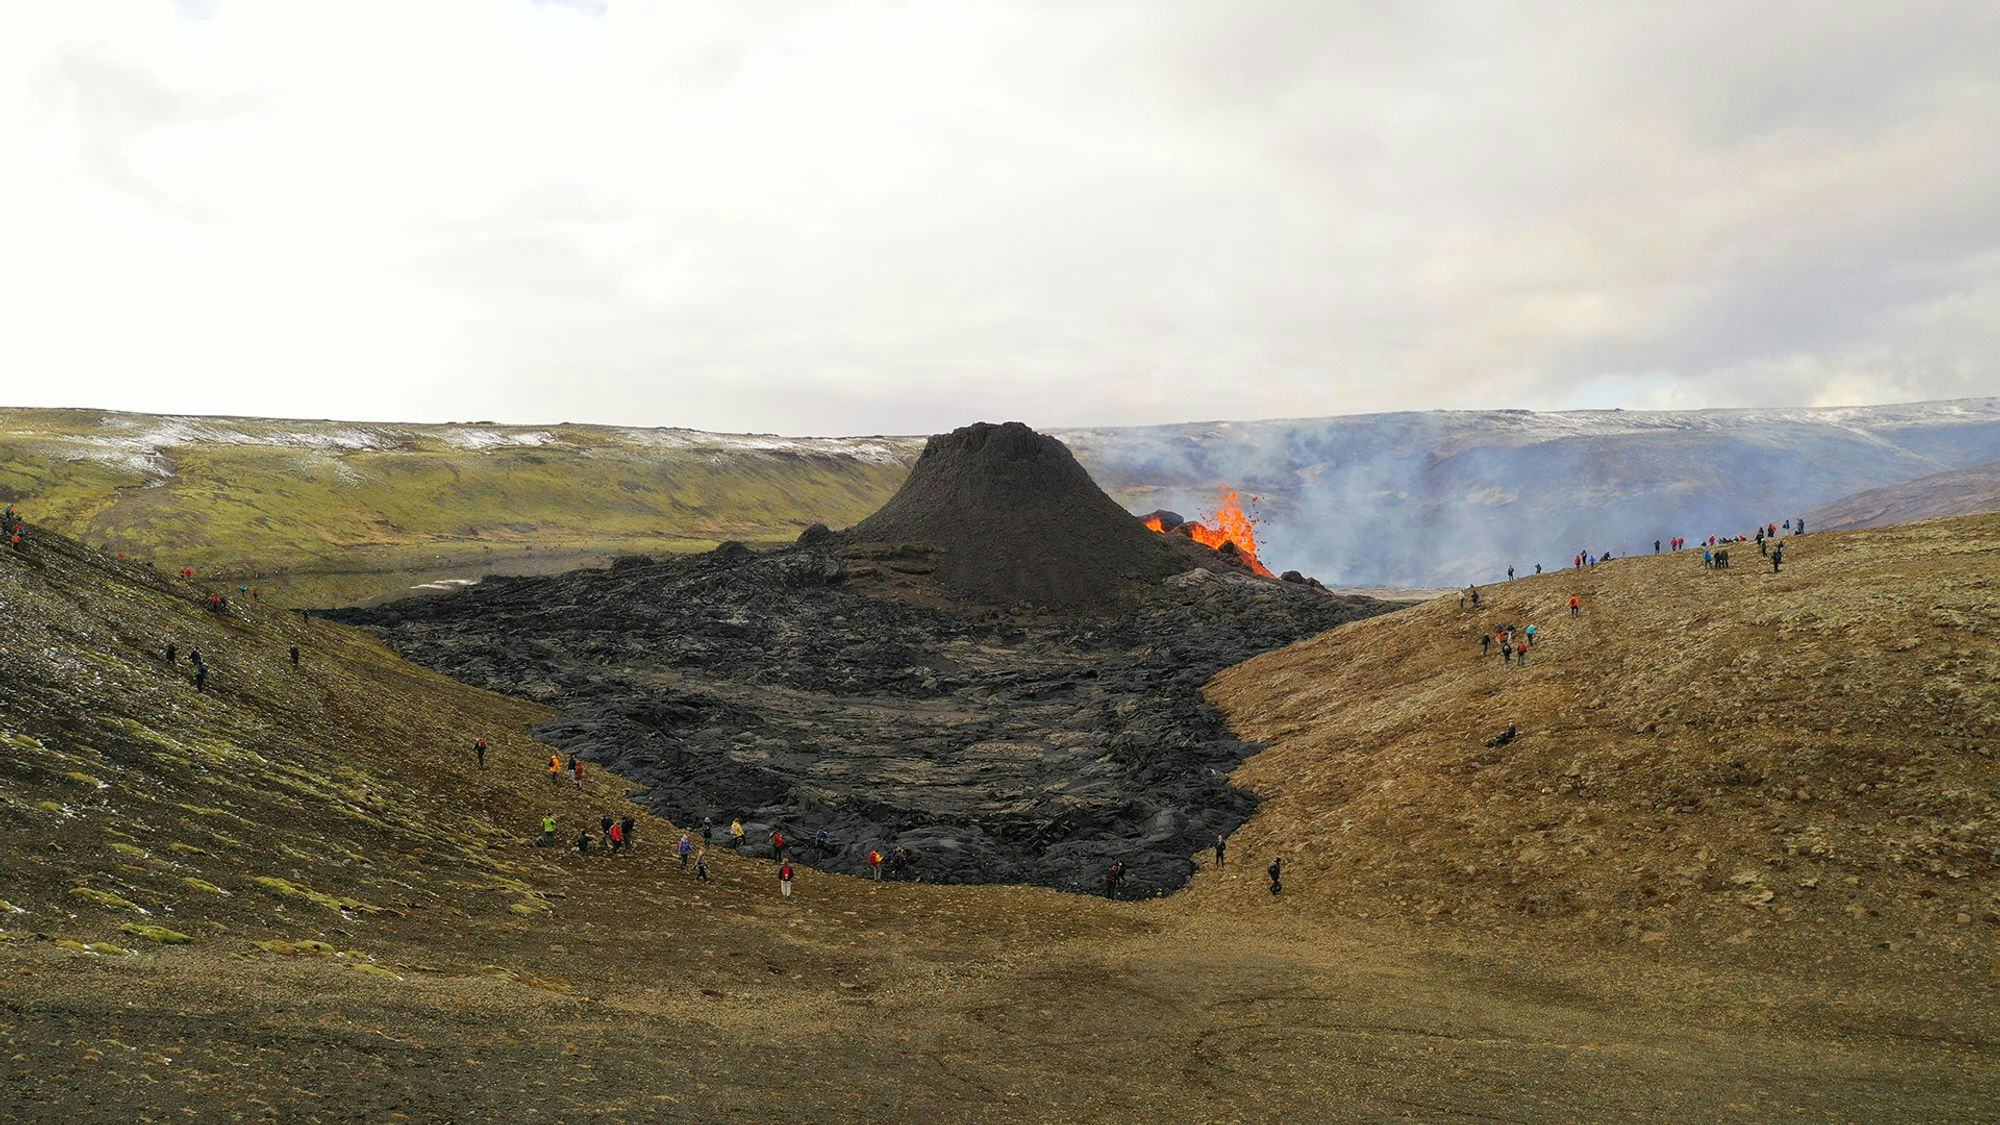 A large crowd of spectators gathers around the eruption